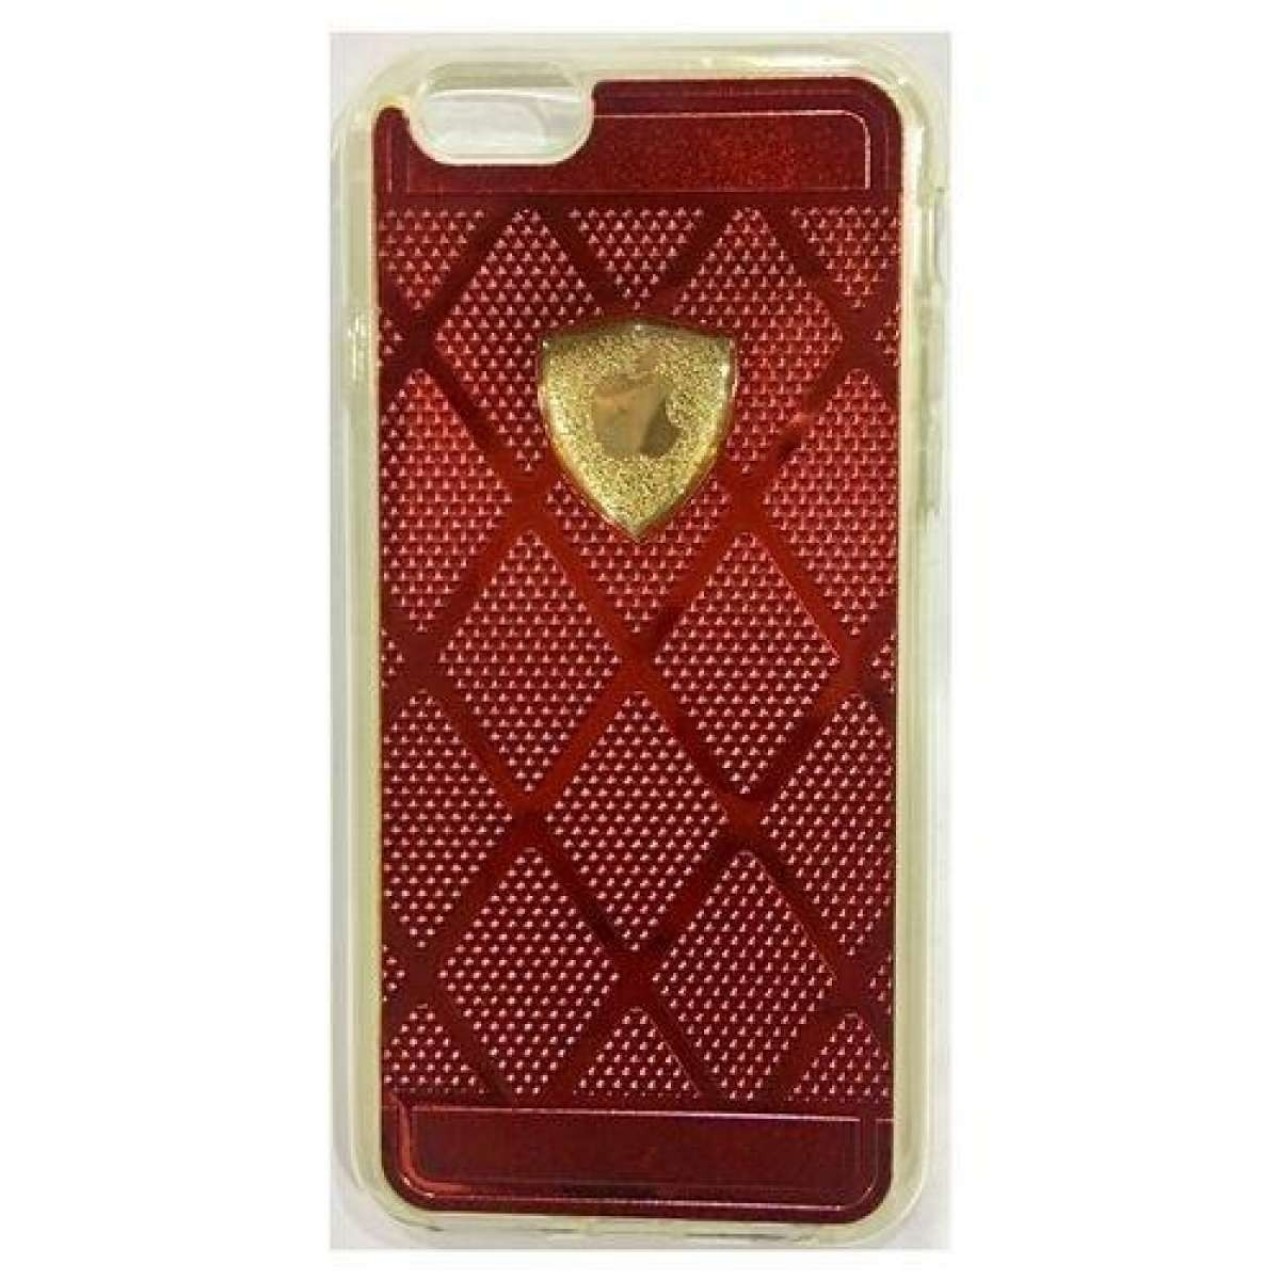 Back Cover For Iphone 6 & 6S - Red